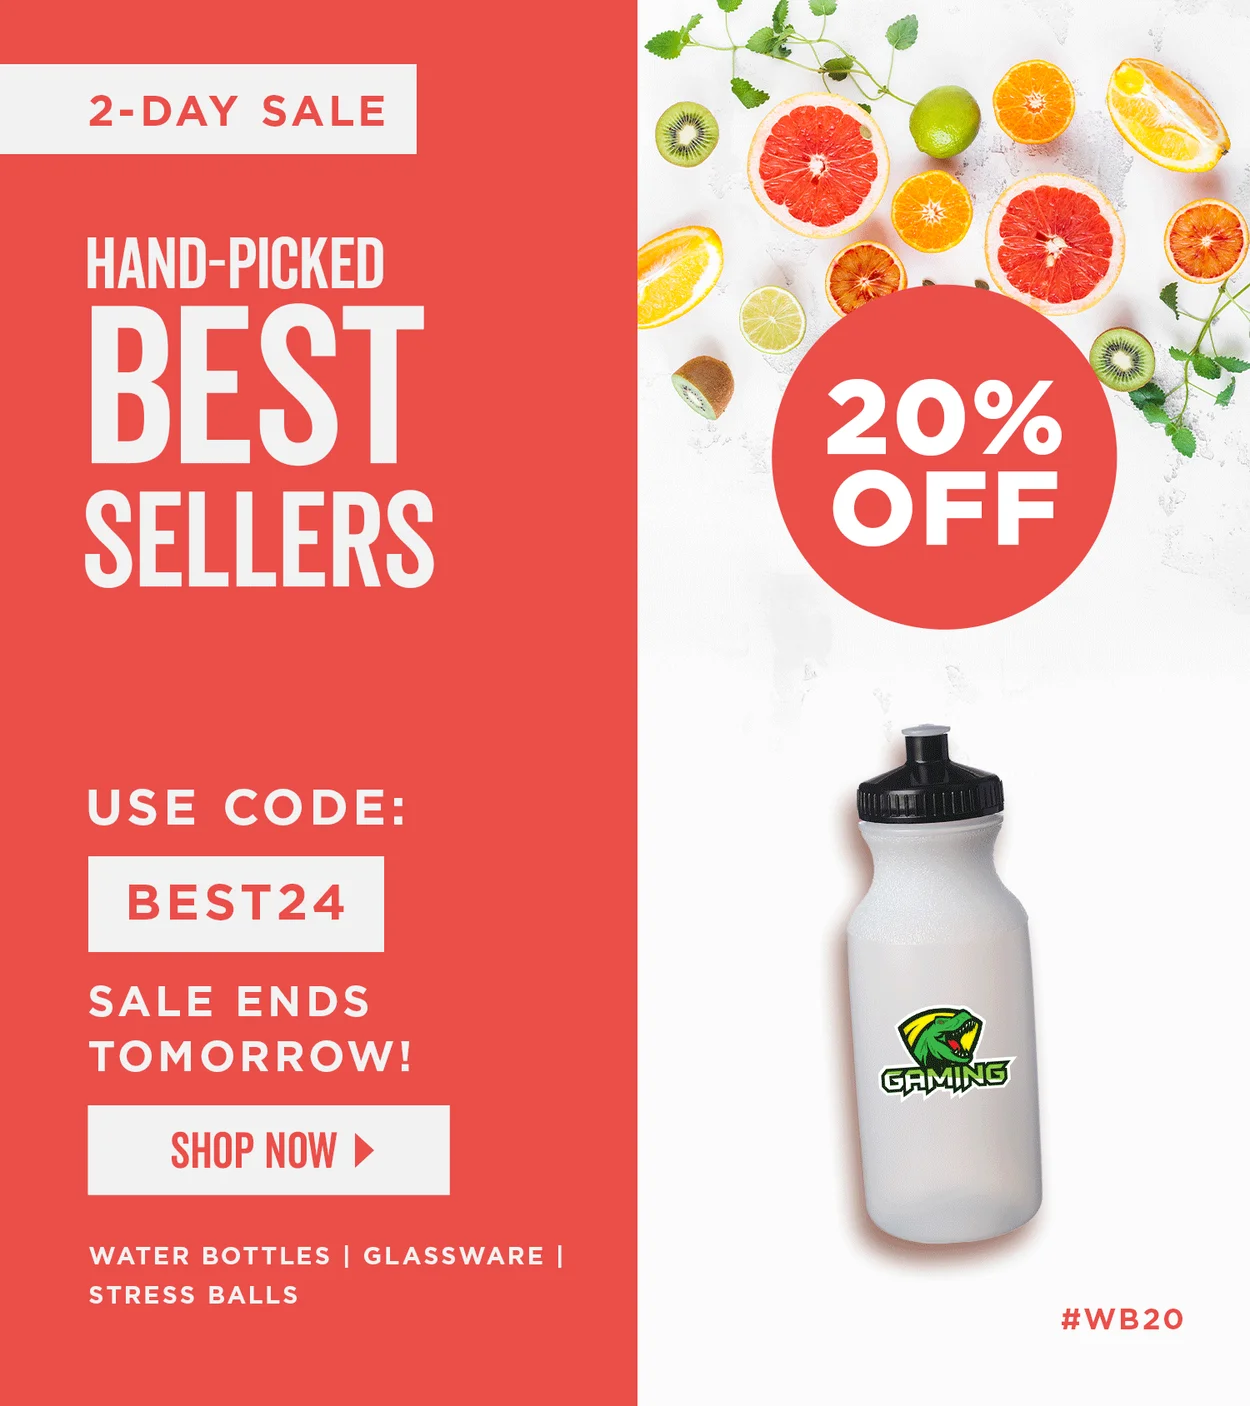 Hand-Picked Best Sellers | 20% Off | Use Code: BEST24 | Shop Now | Discount applied to tote bags, glassware and luggage tags.